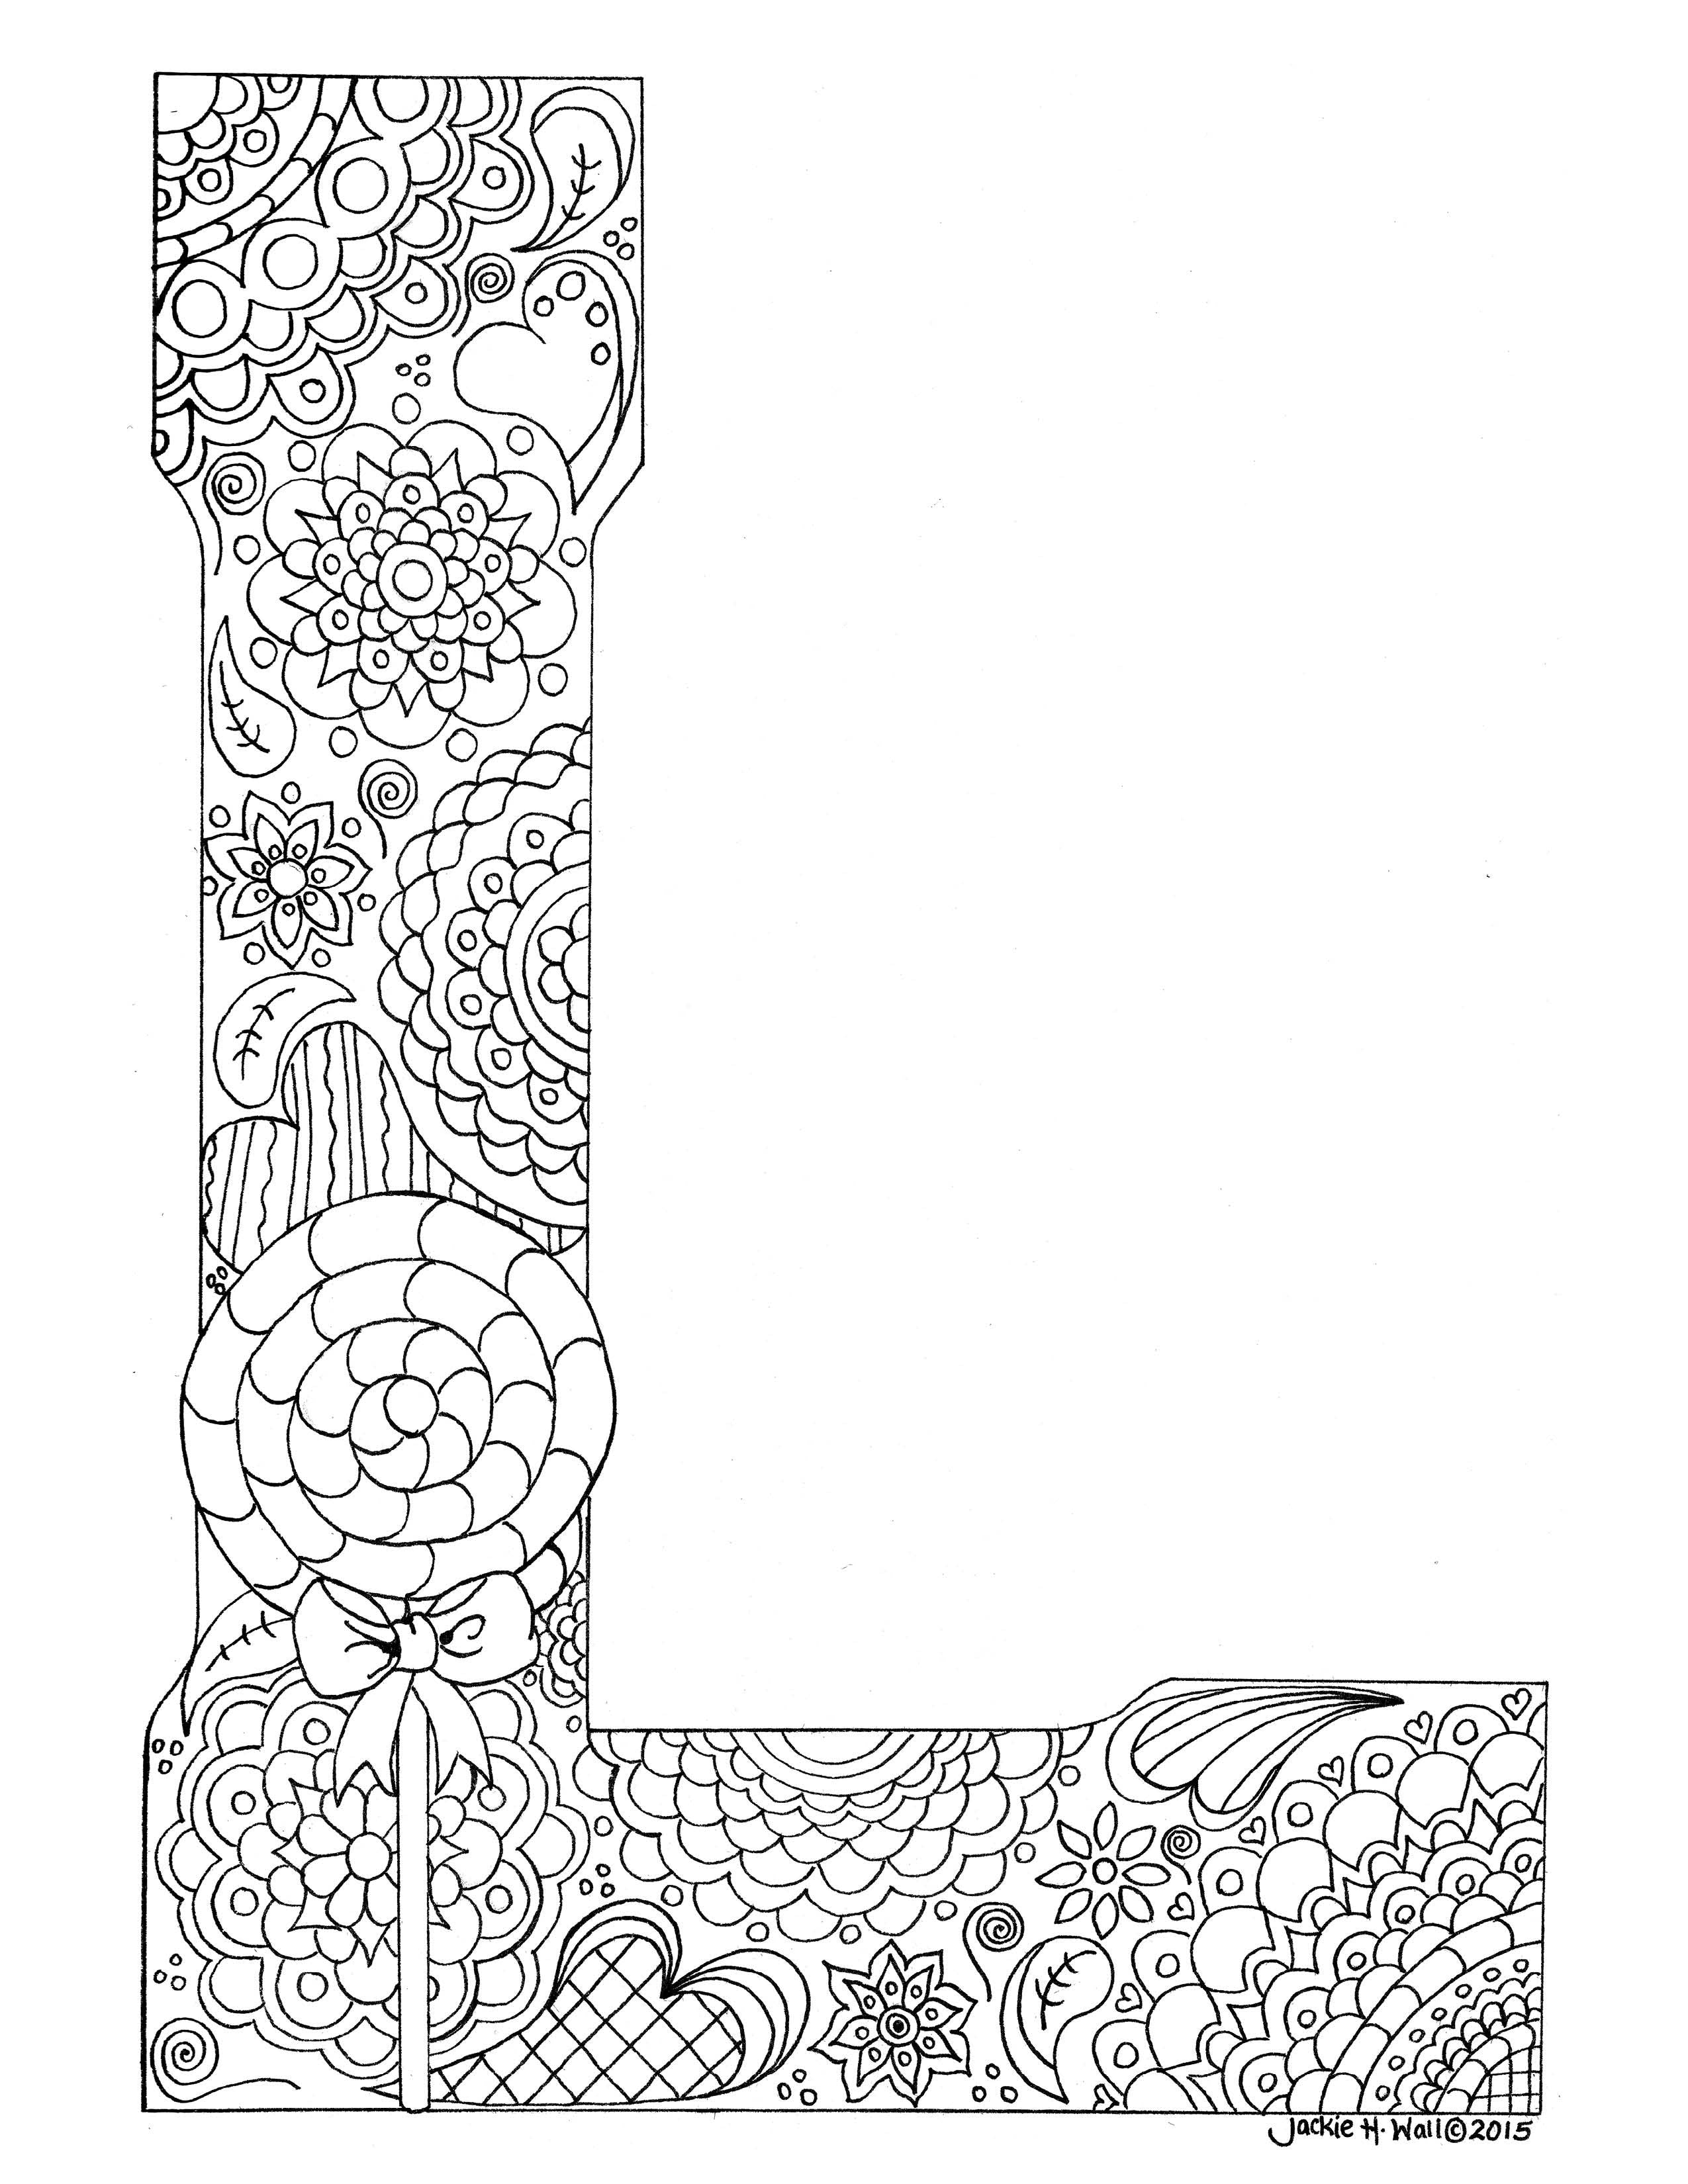 Letter L Colouring Page - Jackie Wall Studio